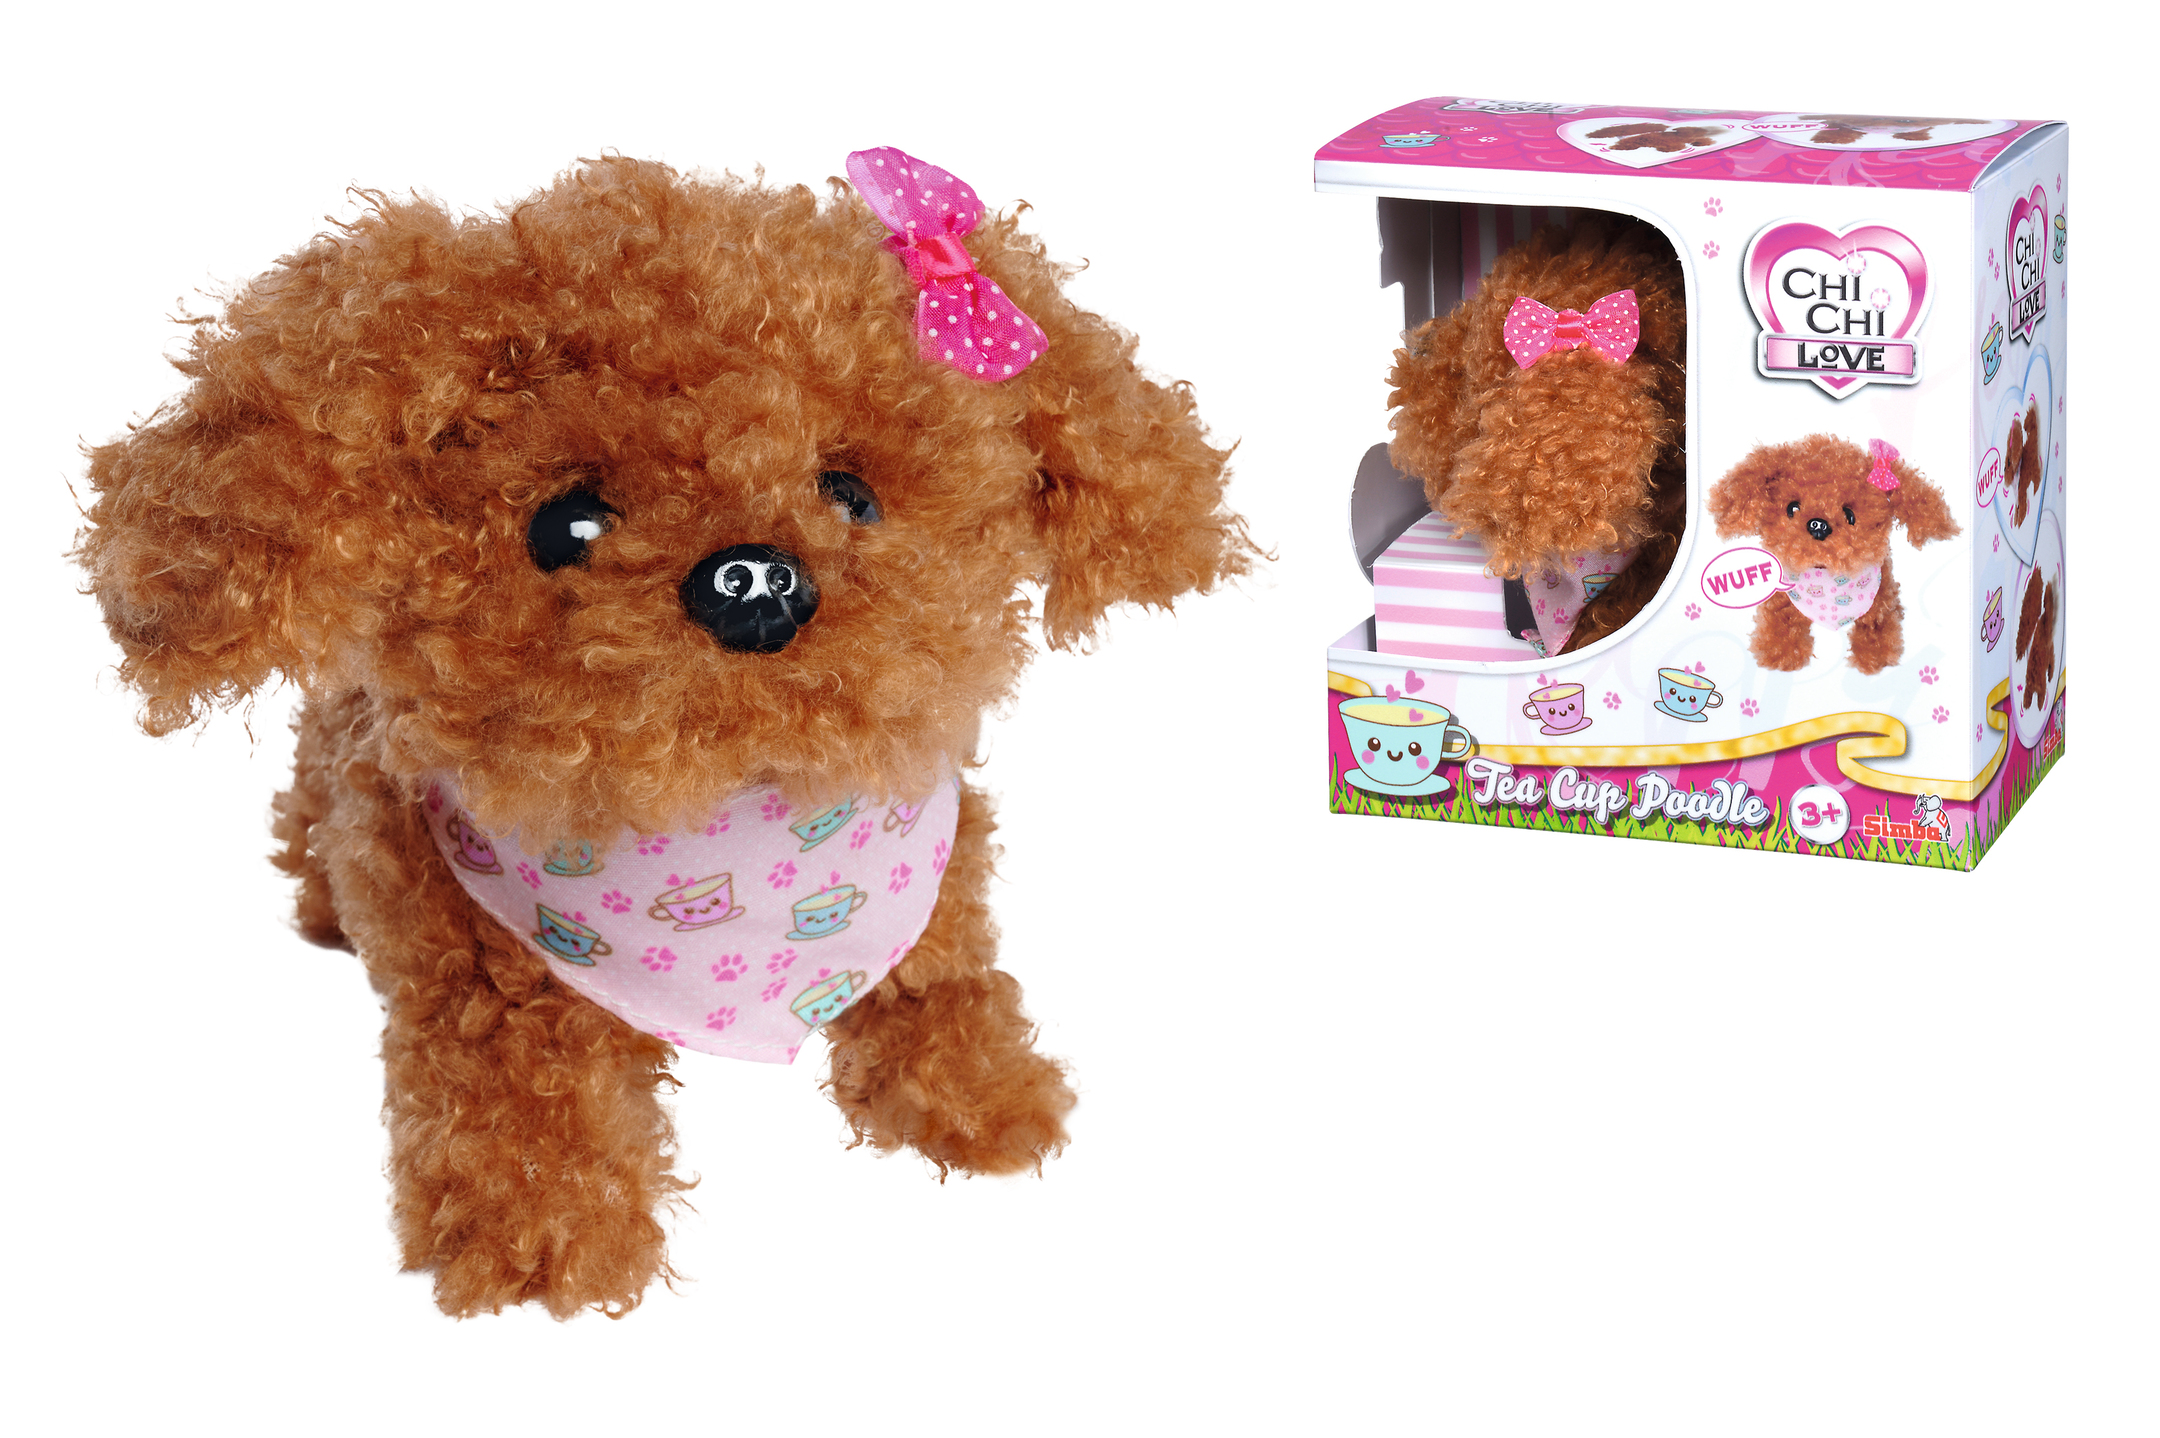 chi chi love Tea Cup Poodle Puppy